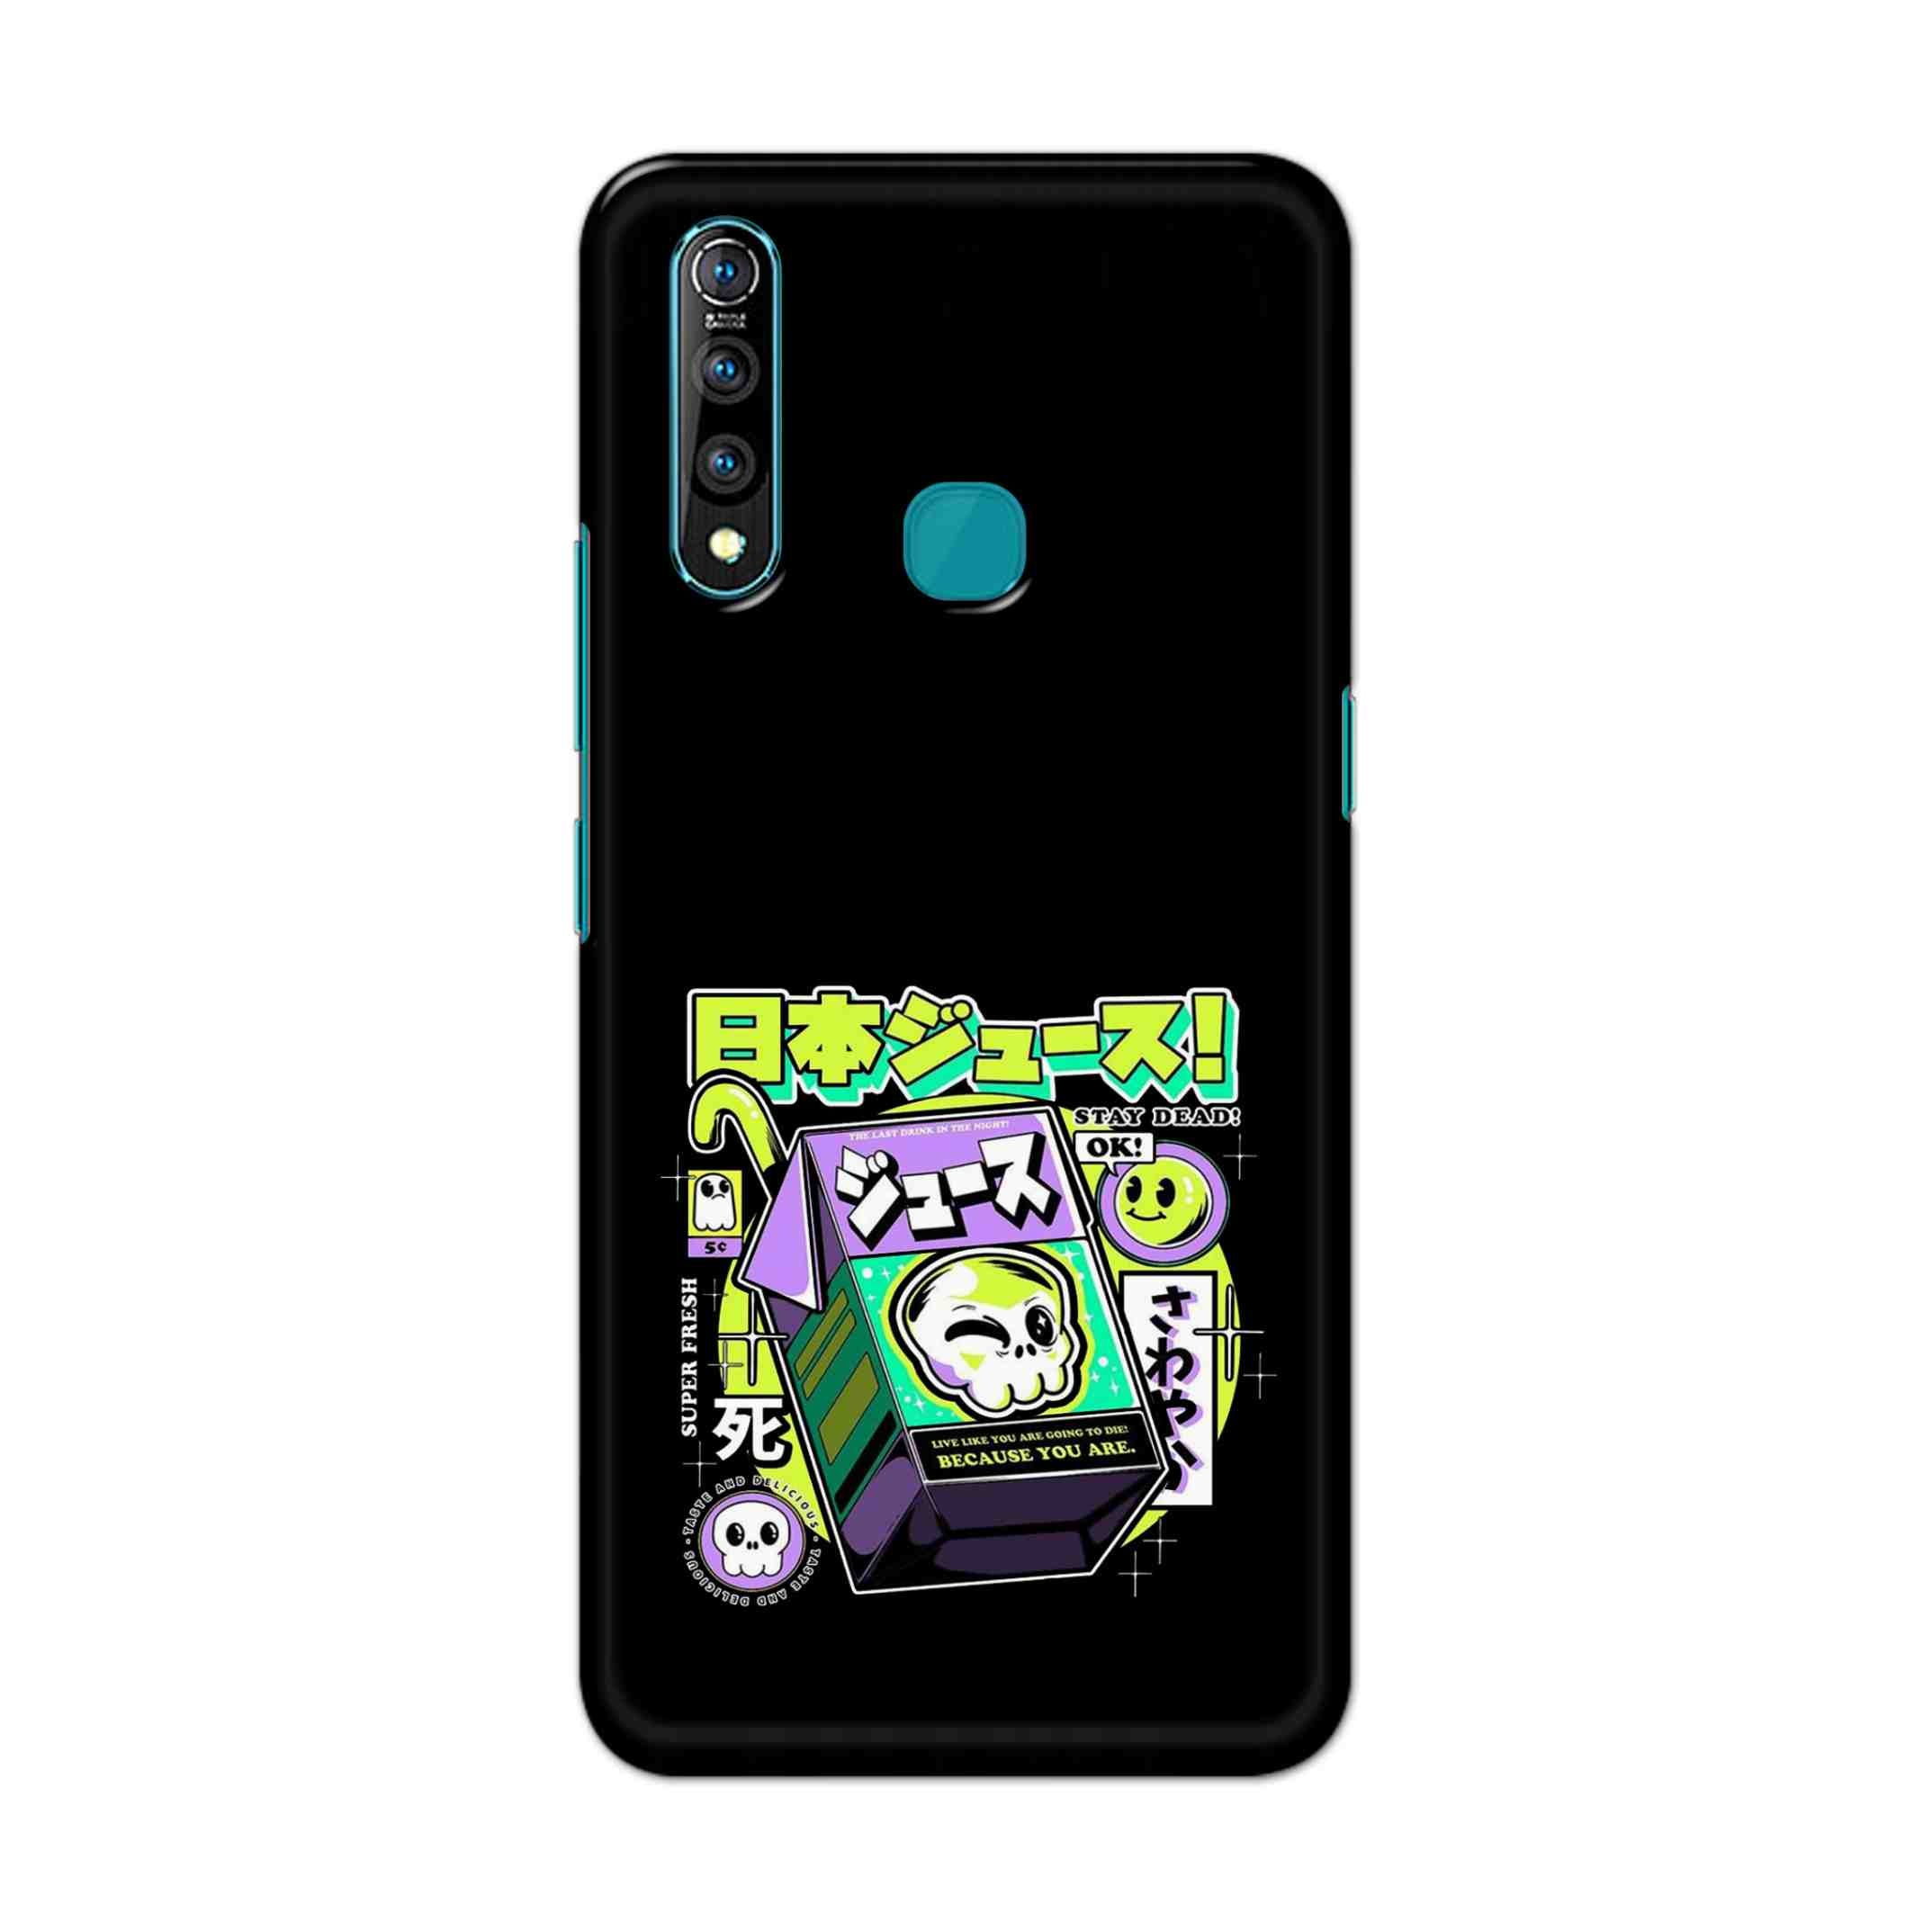 Buy Because You Are Hard Back Mobile Phone Case Cover For Vivo Z1 pro Online